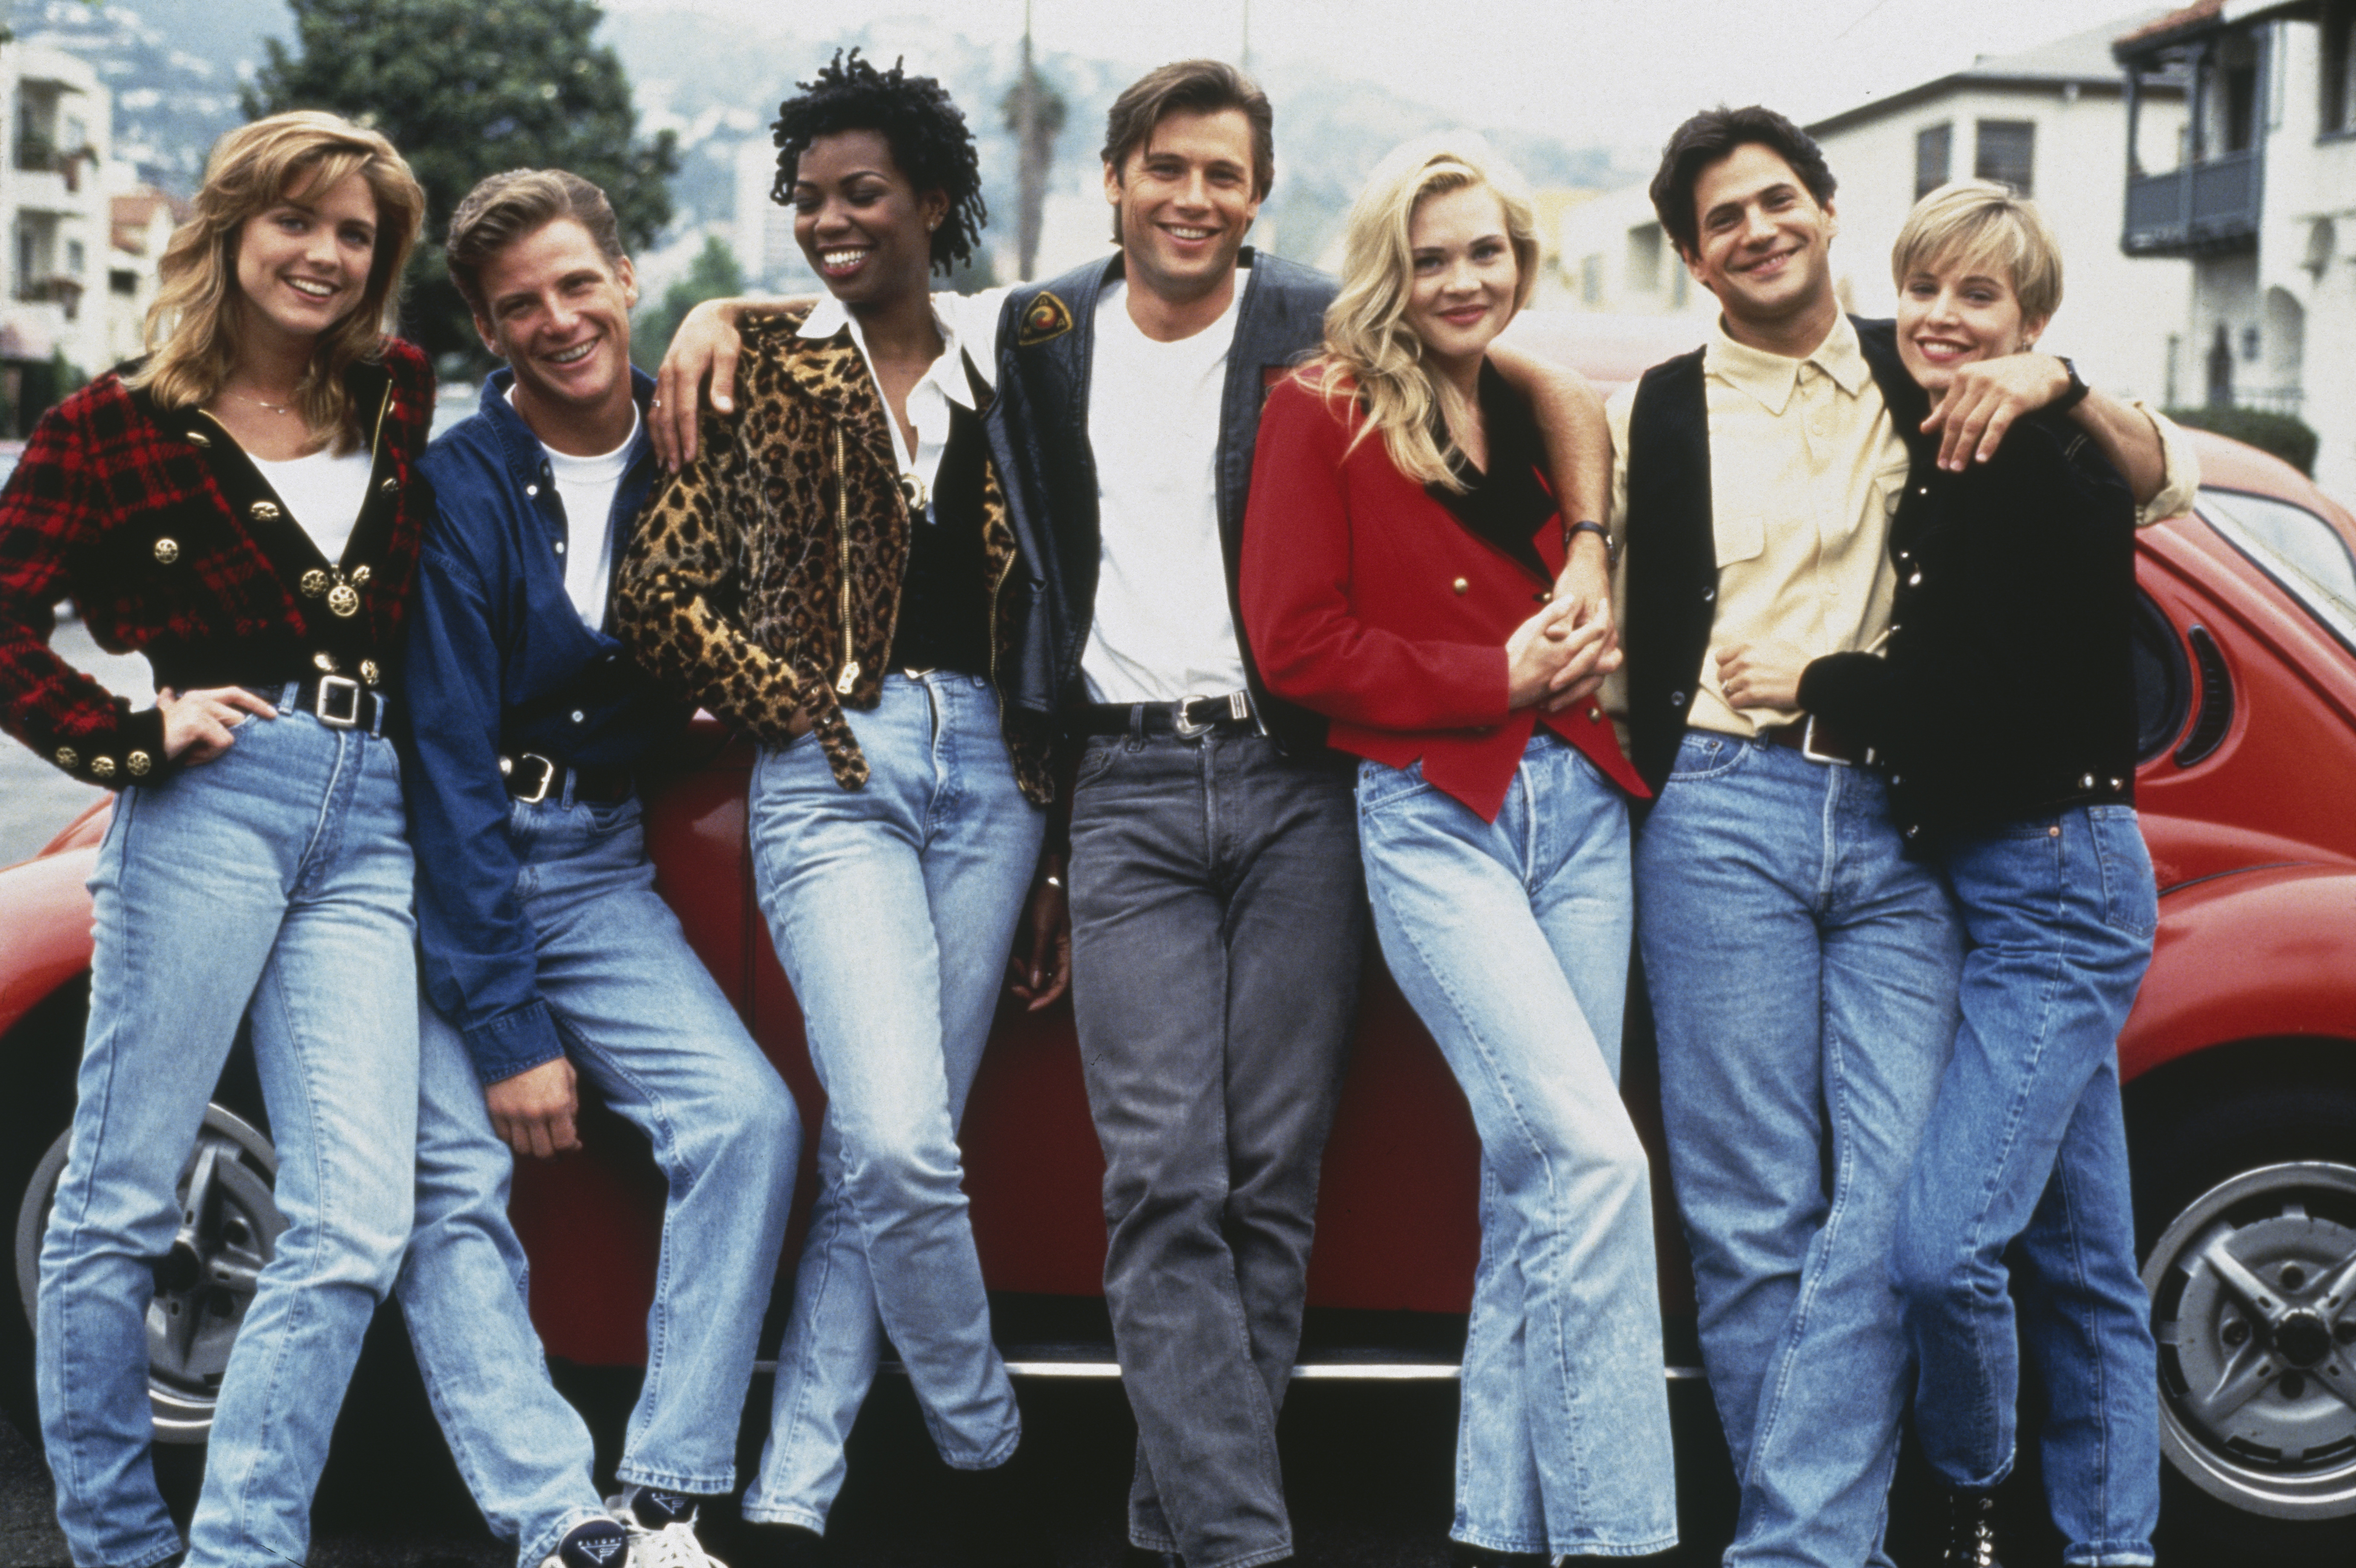 Courtney Thorne-Smith, Doug Savant, Vanessa Williams, Grant Show, Amy Locane, Thomas Calabro and Josie Bissett from "Melrose Place" in 1993 | Source: Getty Images